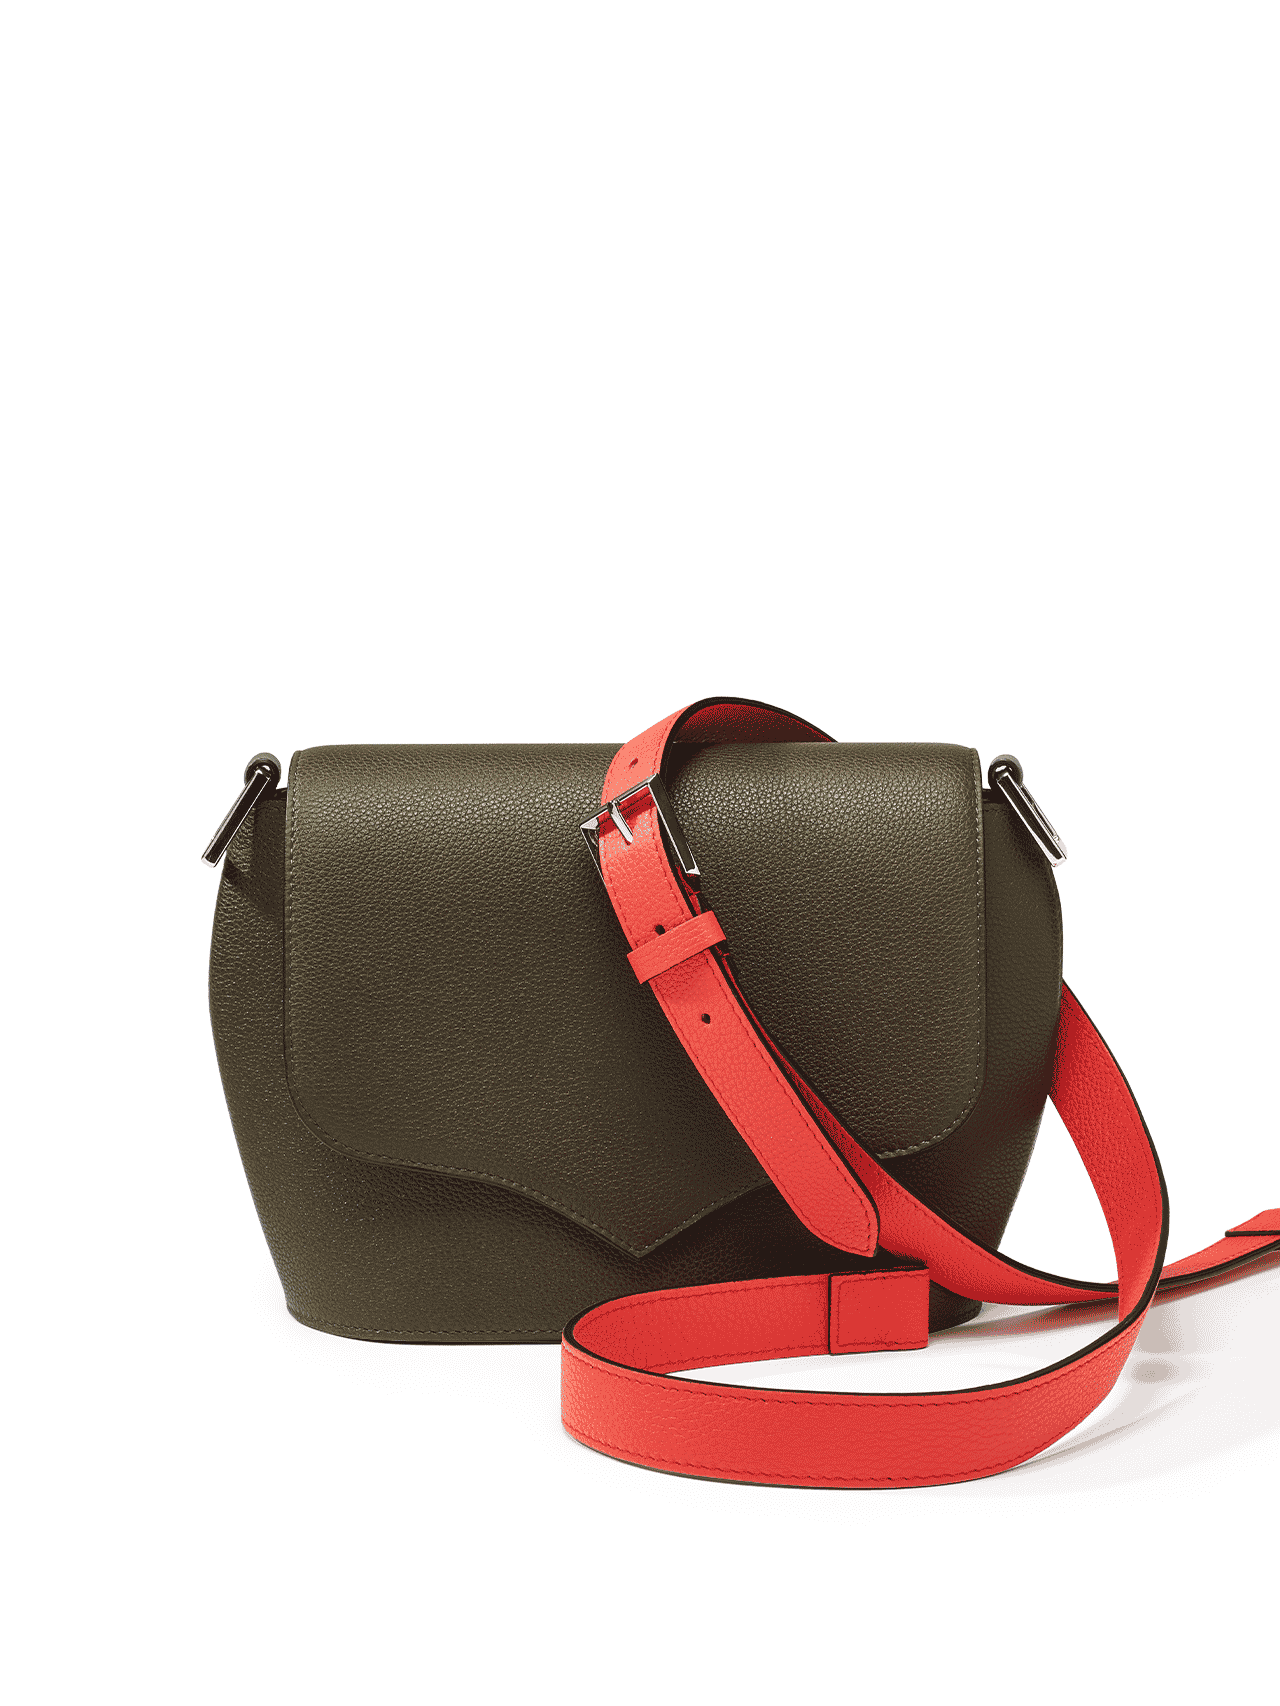 bag leather jean rousseau green red